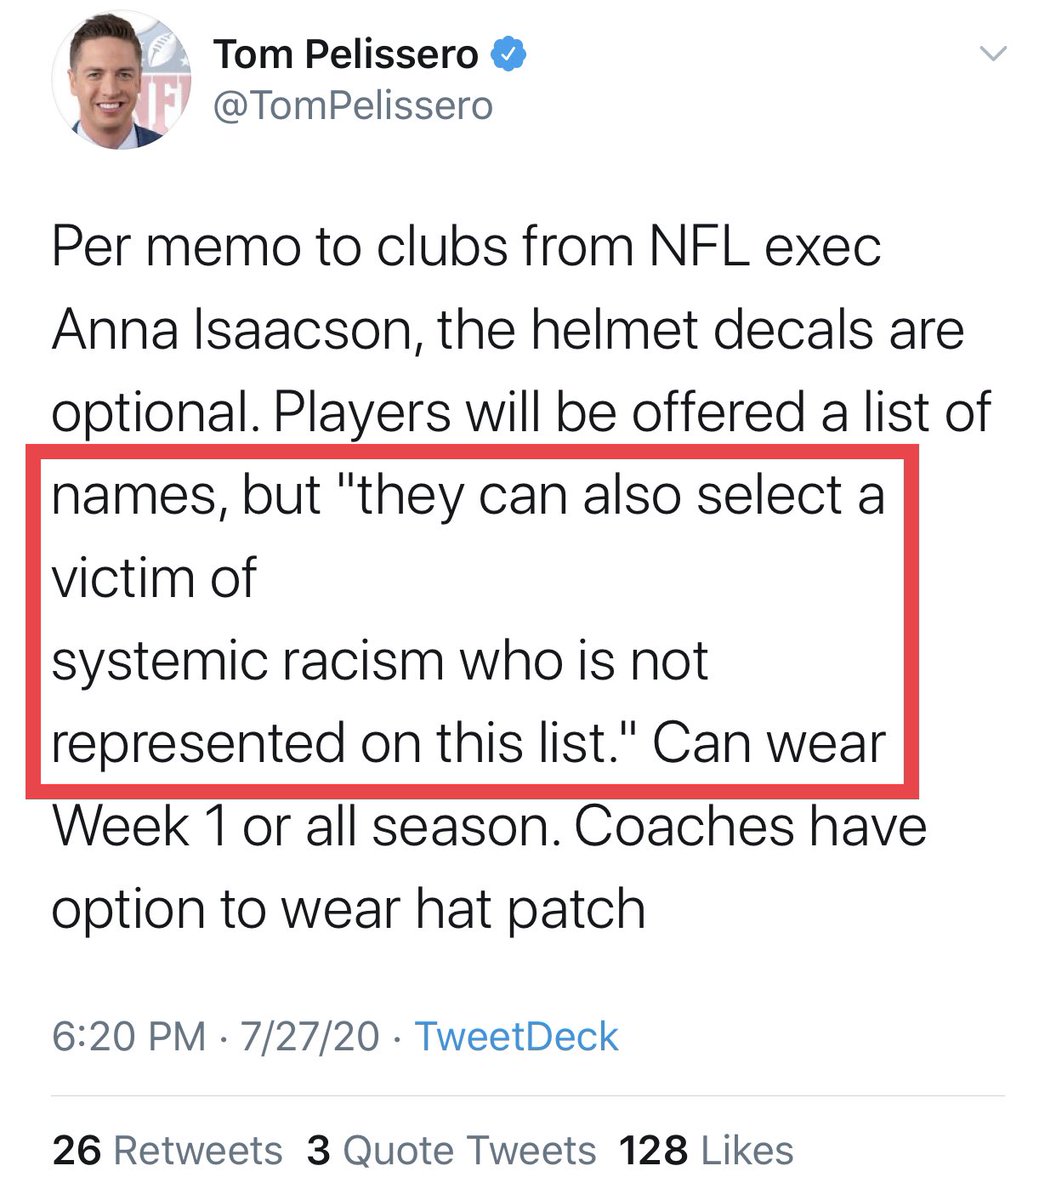 NFL exec Anna Isaacson said the decals “amplify its social justice initiatives” and players can “select a *victim of systematic racism* who is not represented” on an NFL provided list. @tylereifert &  @AIfromBK, please explain how David Dorn is a victim of systemic racism.